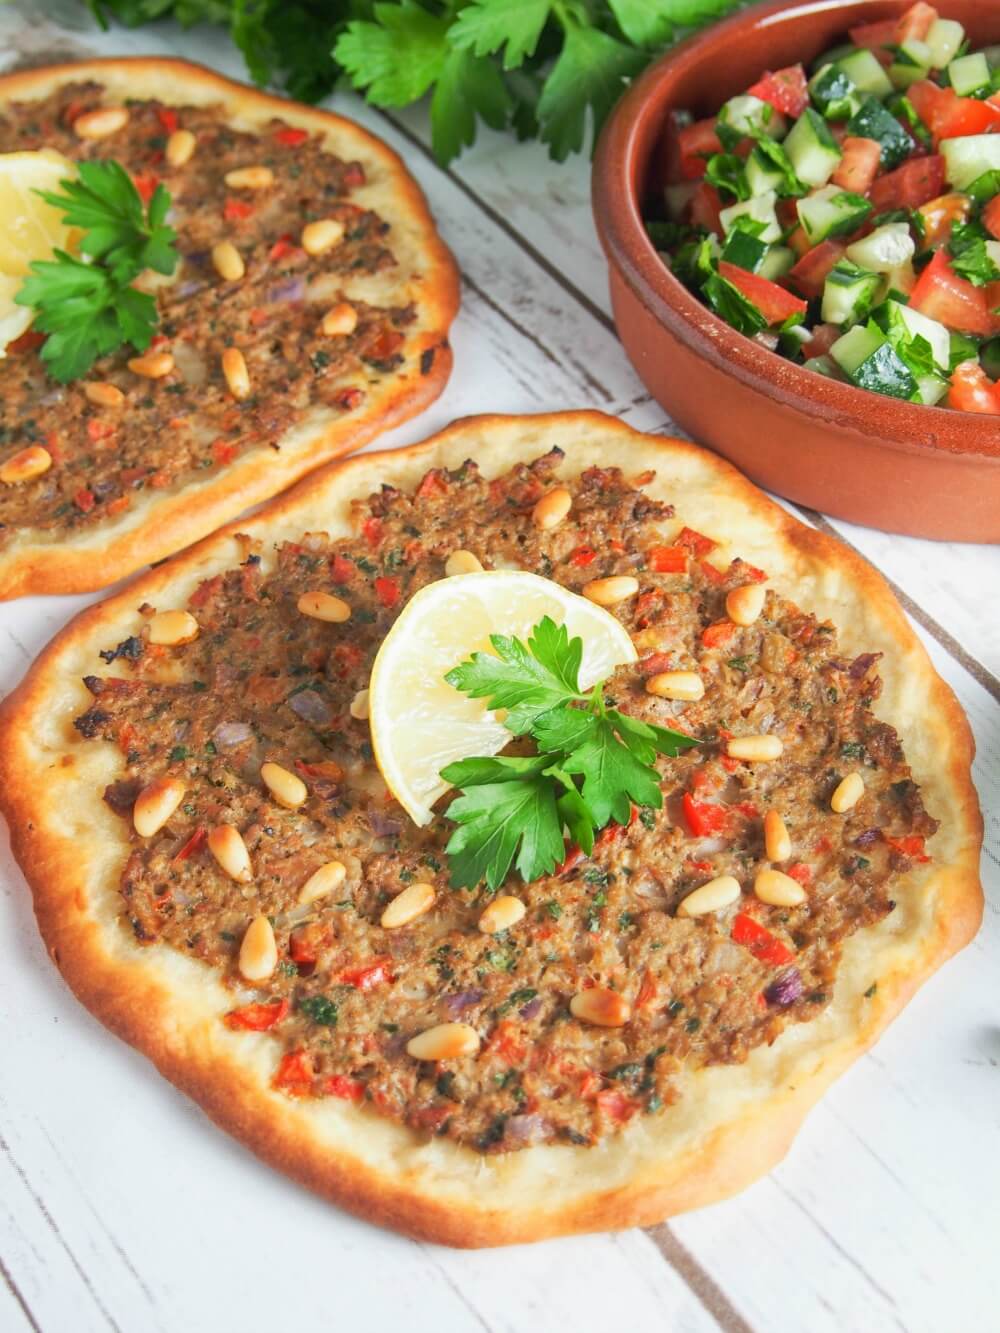 Lahmacun with a slice of lemon and sprig of parsley garnish on top with bowl of salad to side